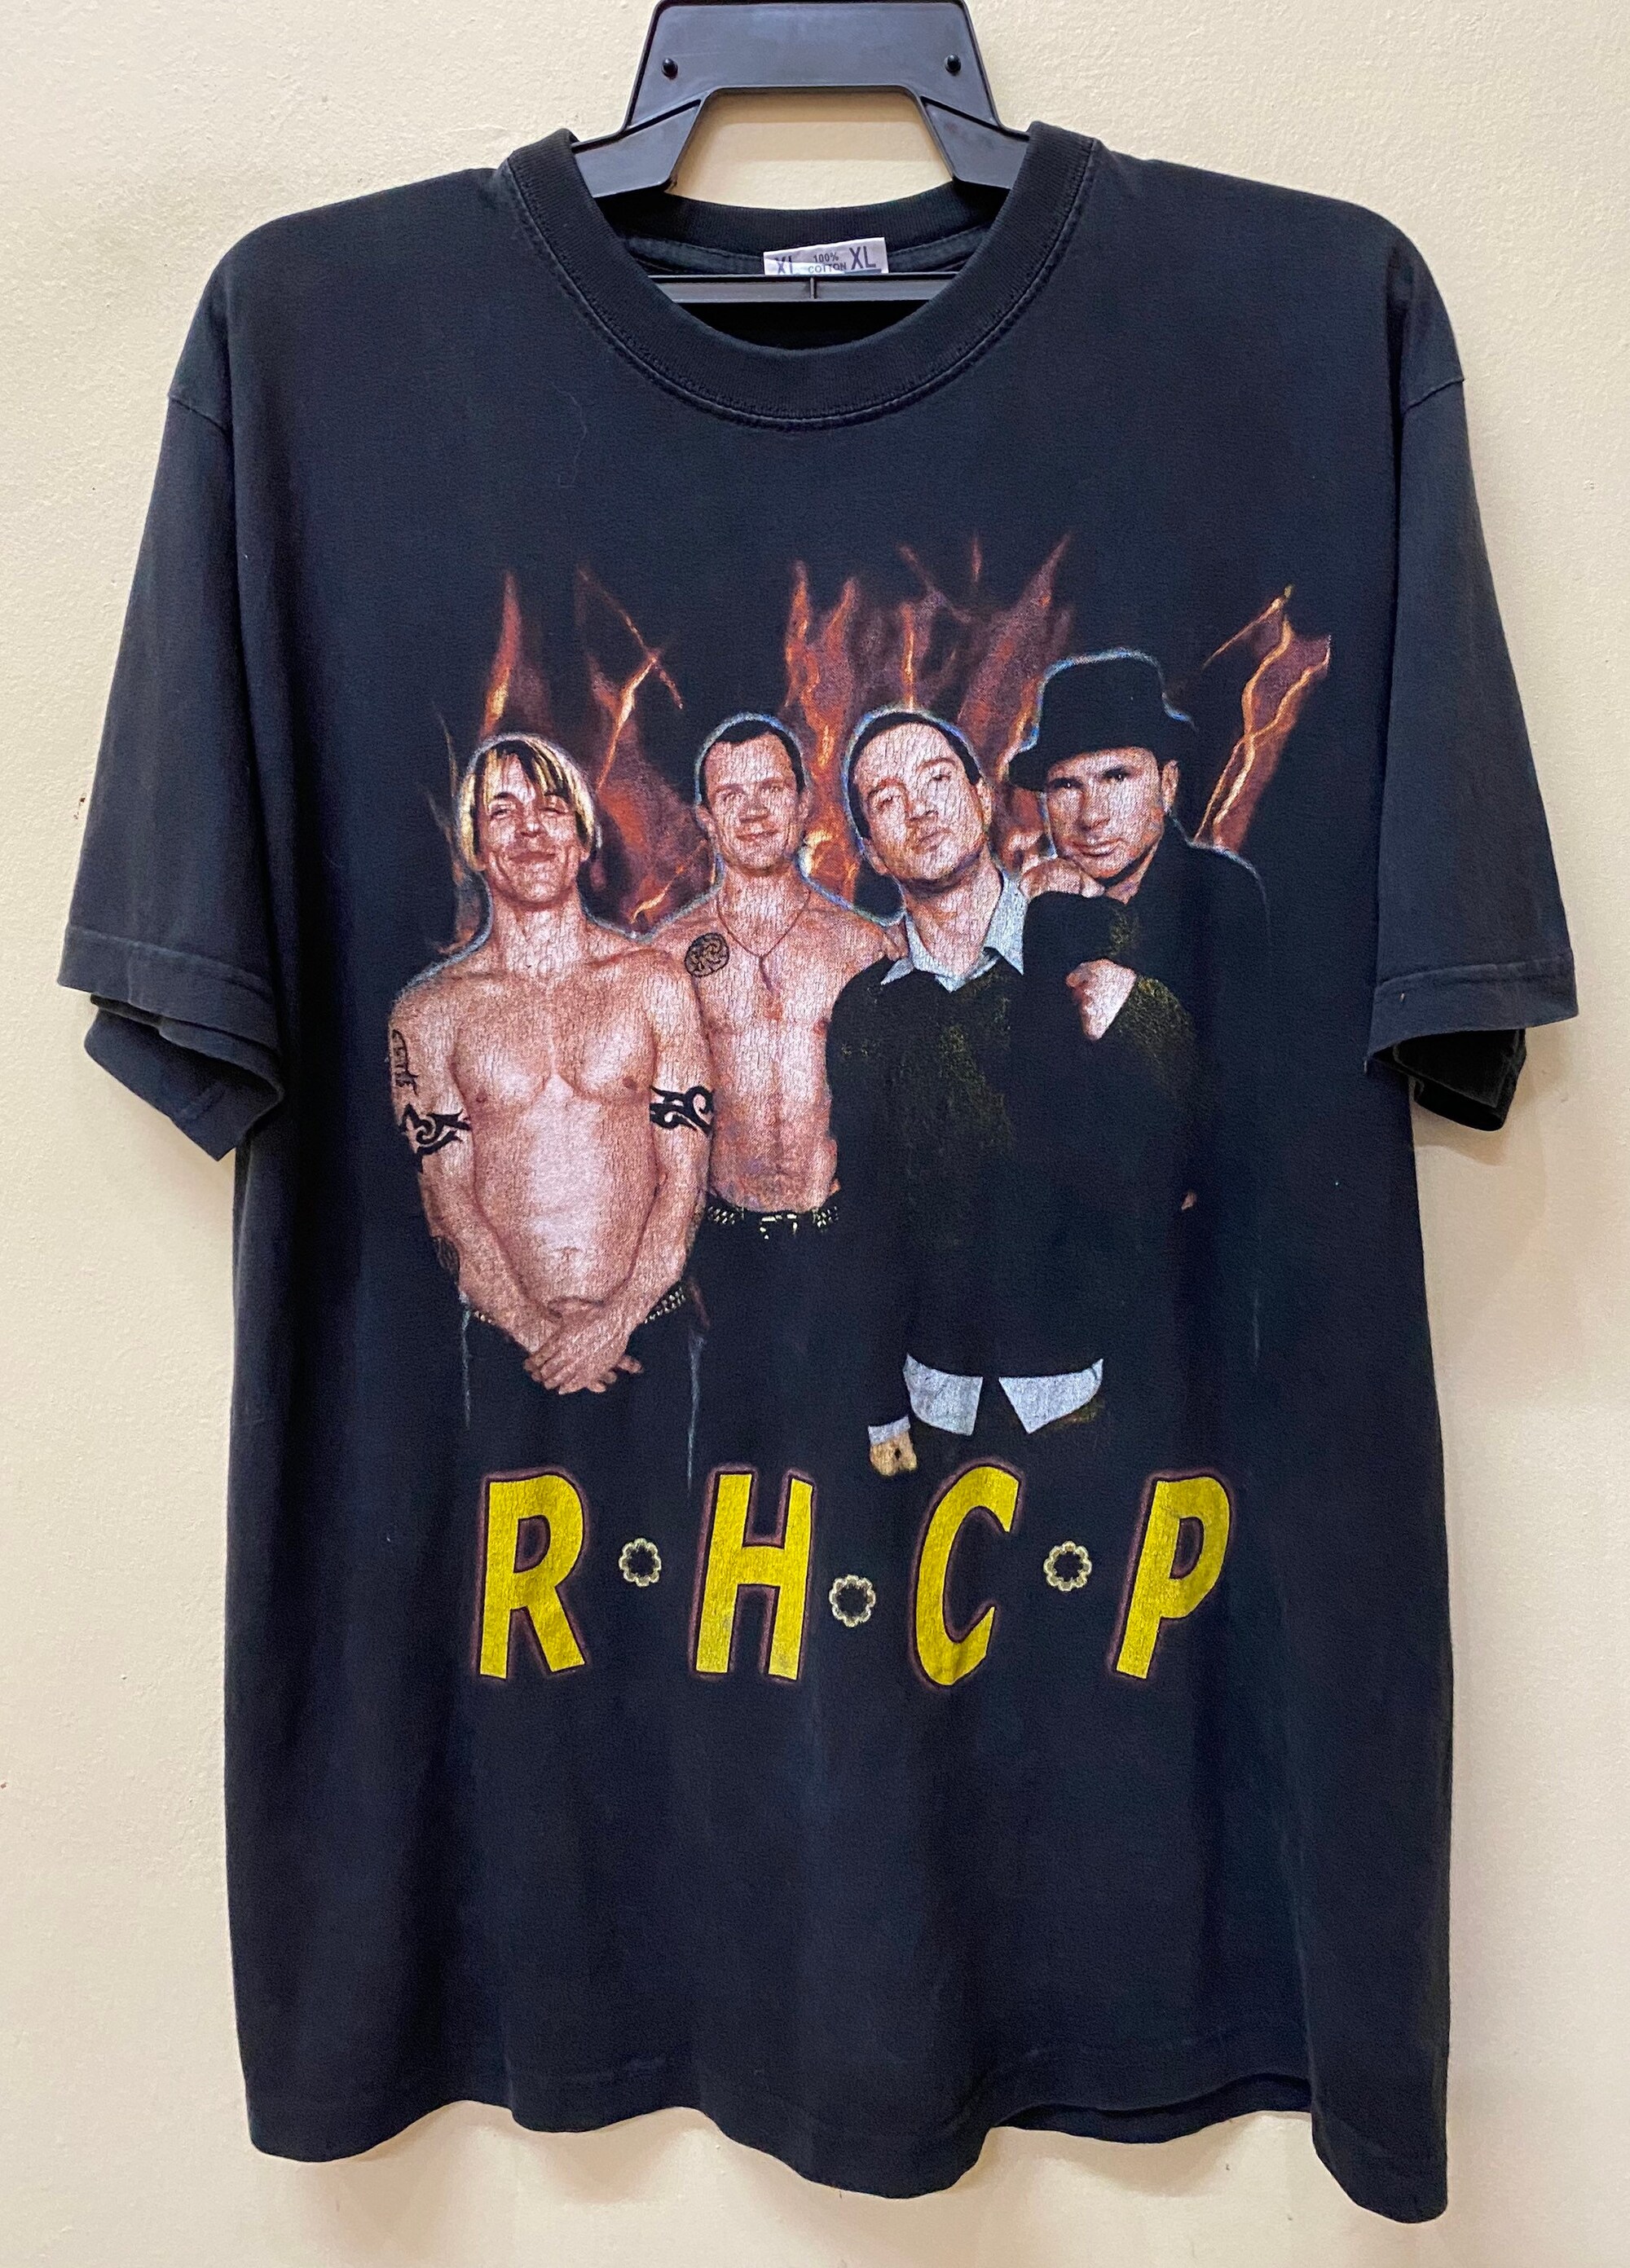 Vintage 90s Red Hot Chili Peppers bootleg t shirt